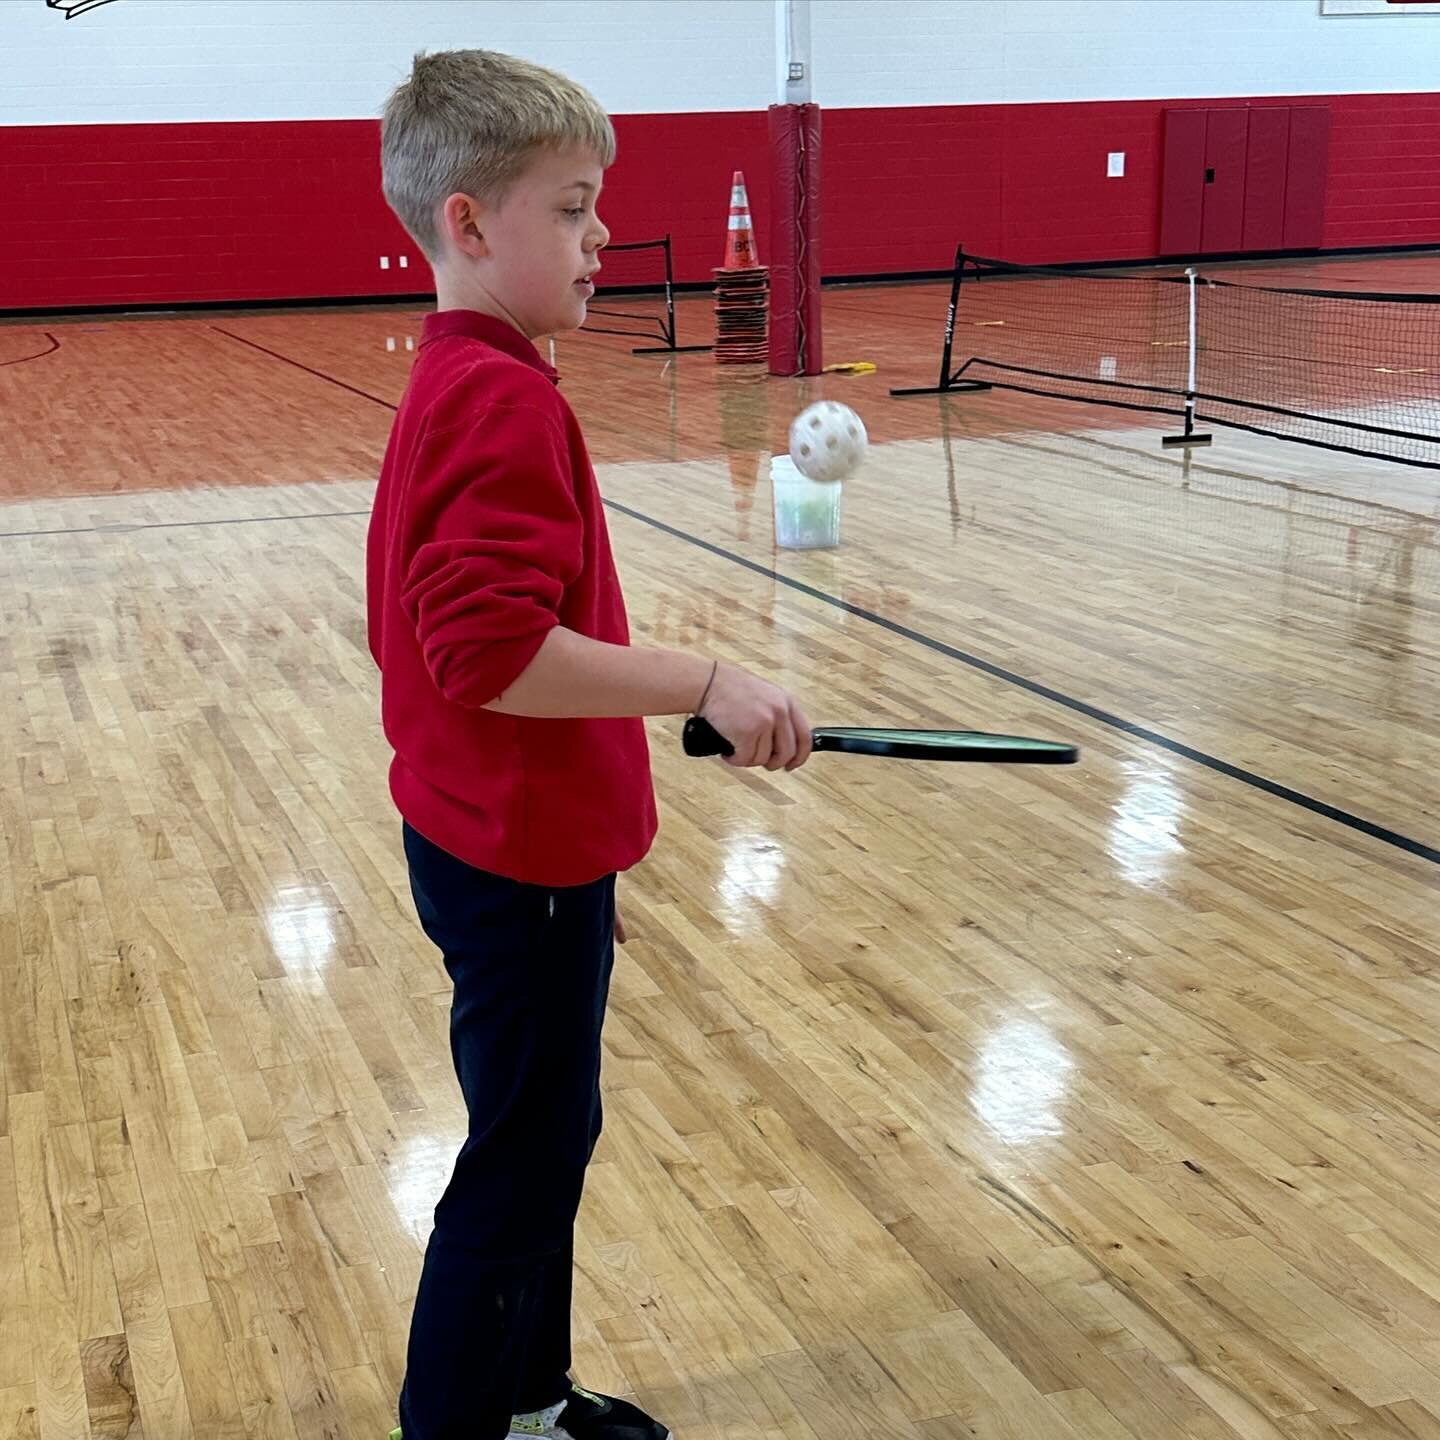 Learning pickleball in PE!  Today was all about starting with the basics and getting used to the ball and racquet. #wearestals #pickleballislife